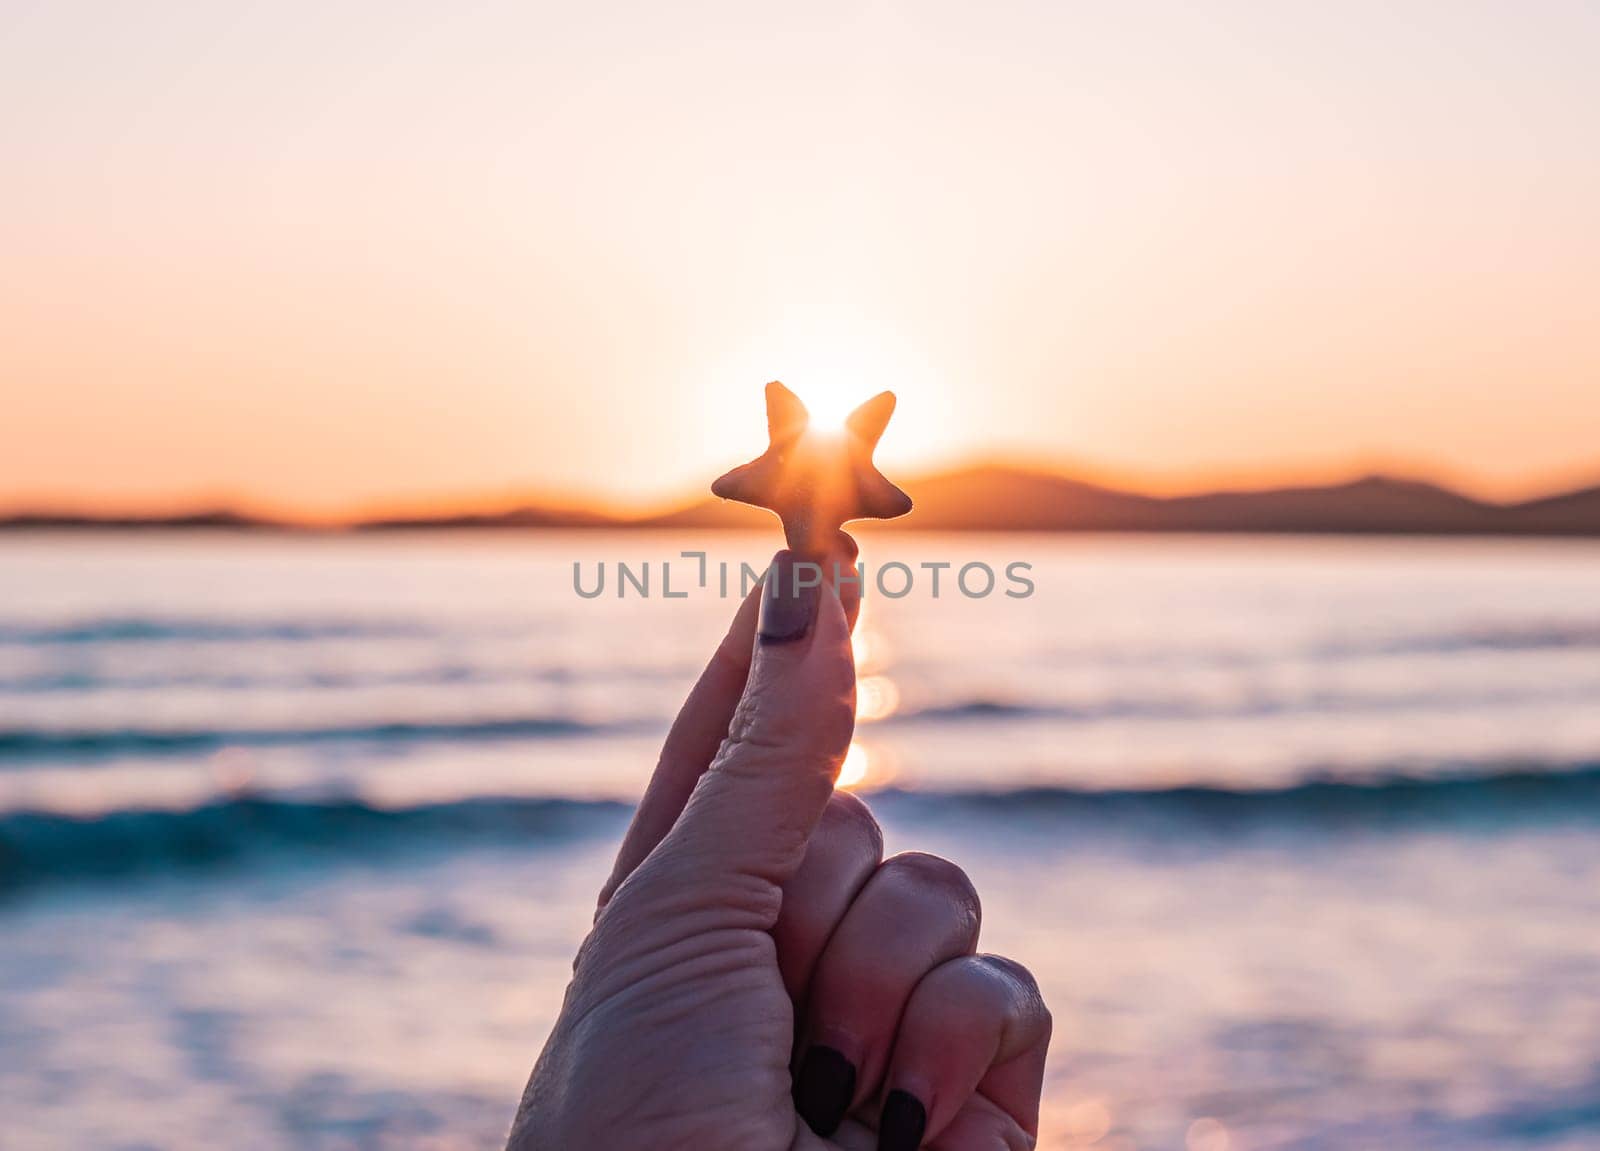 A hand with dark nail polish holds a starfish up towards the sunset, with the ocean and mountains in the background. The sky is filled with vibrant colors as the sun sets over the water.